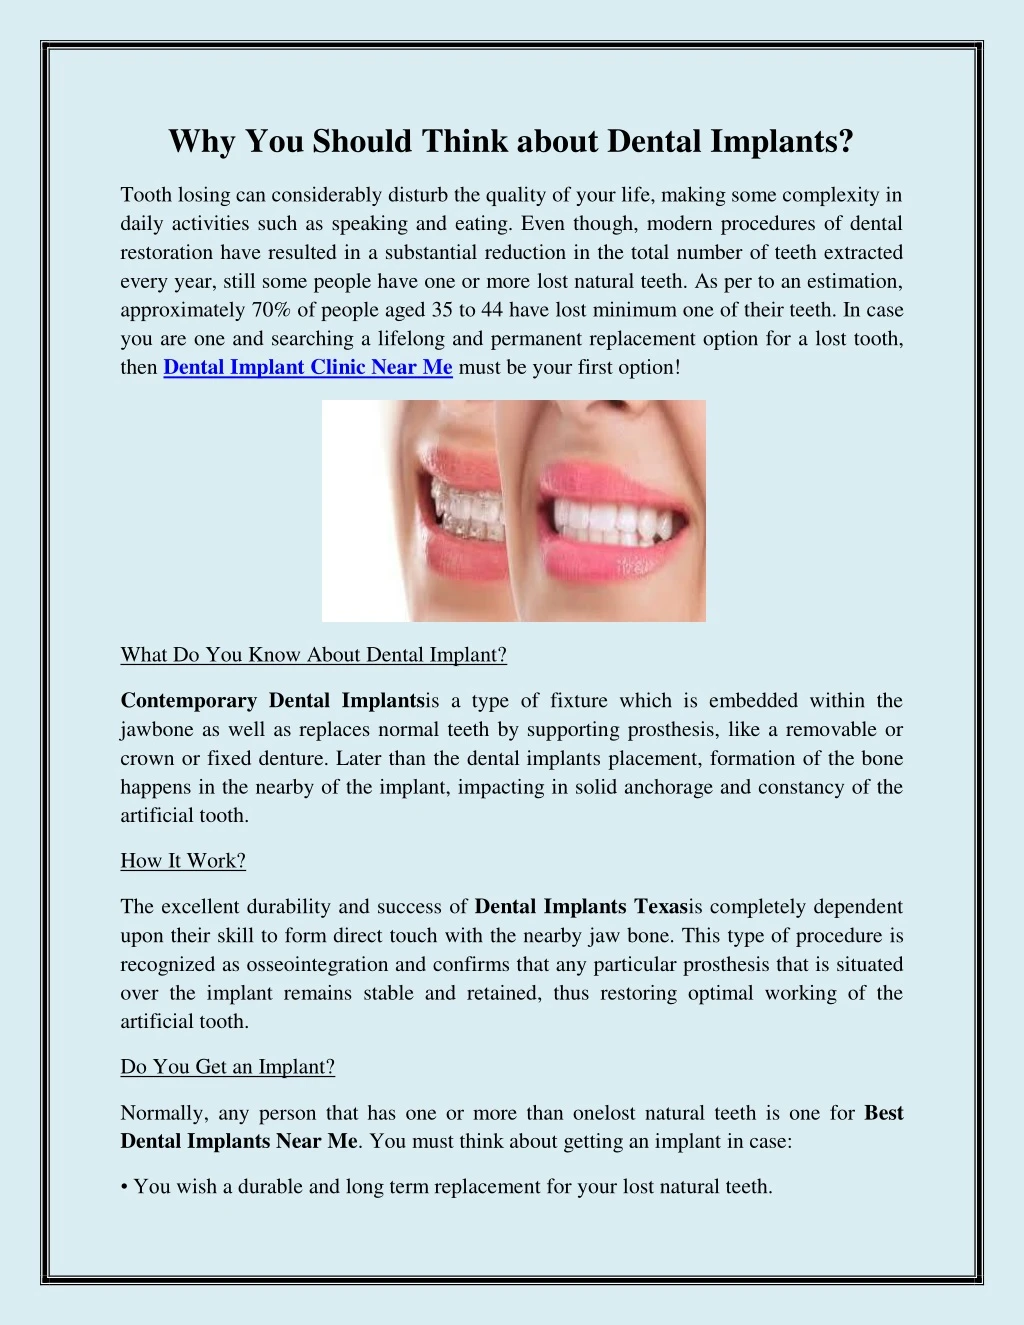 why you should think about dental implants